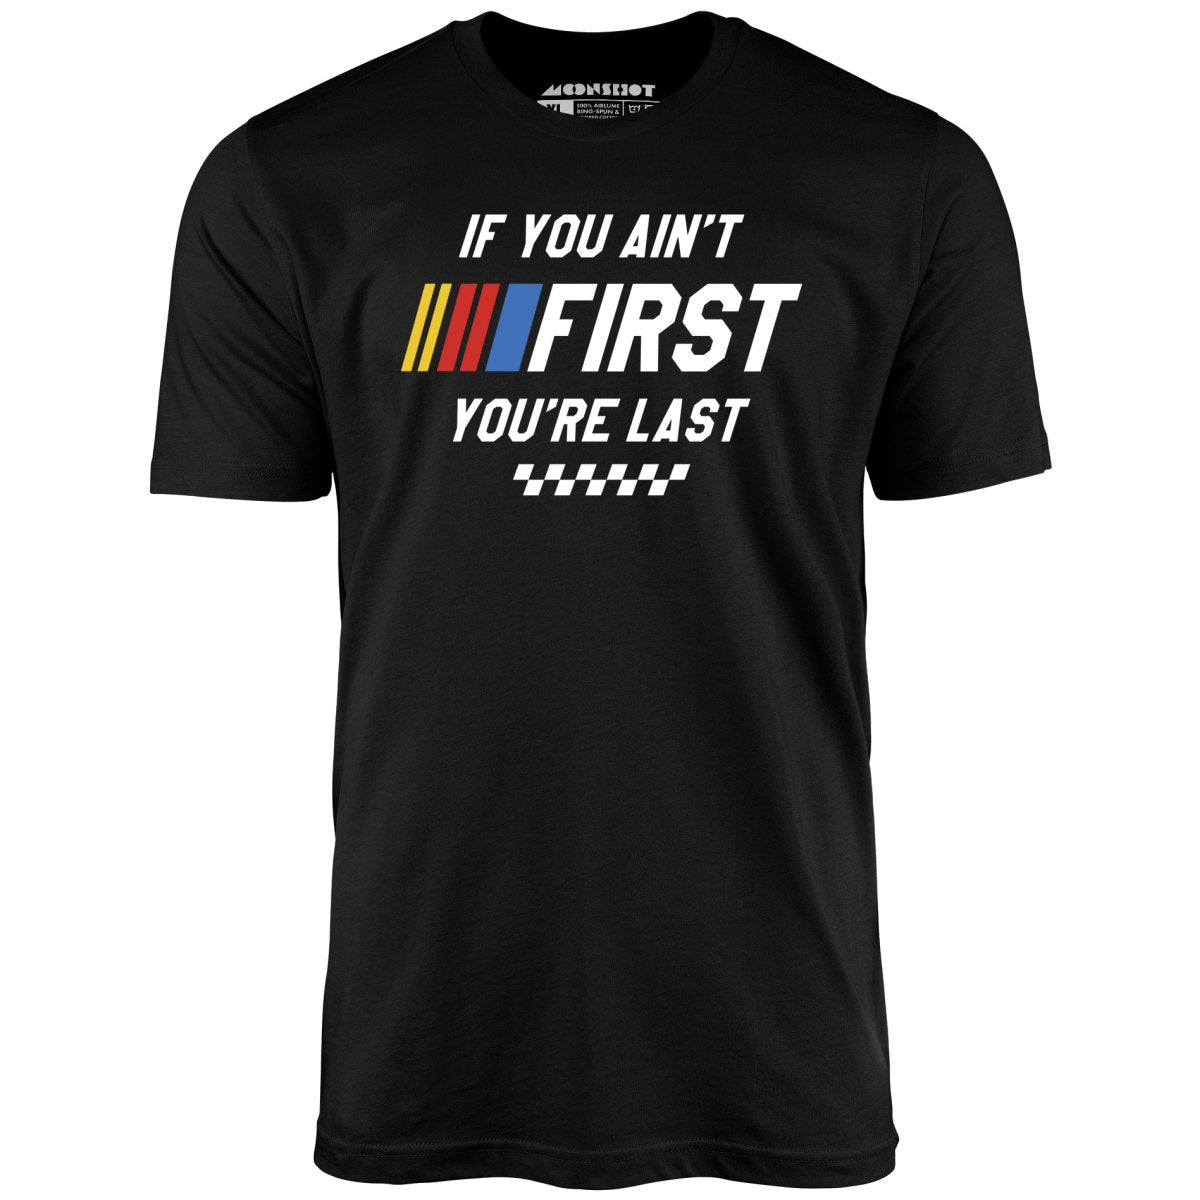 If You Ain't First You're Last - Talladega Nights - Unisex T-Shirt